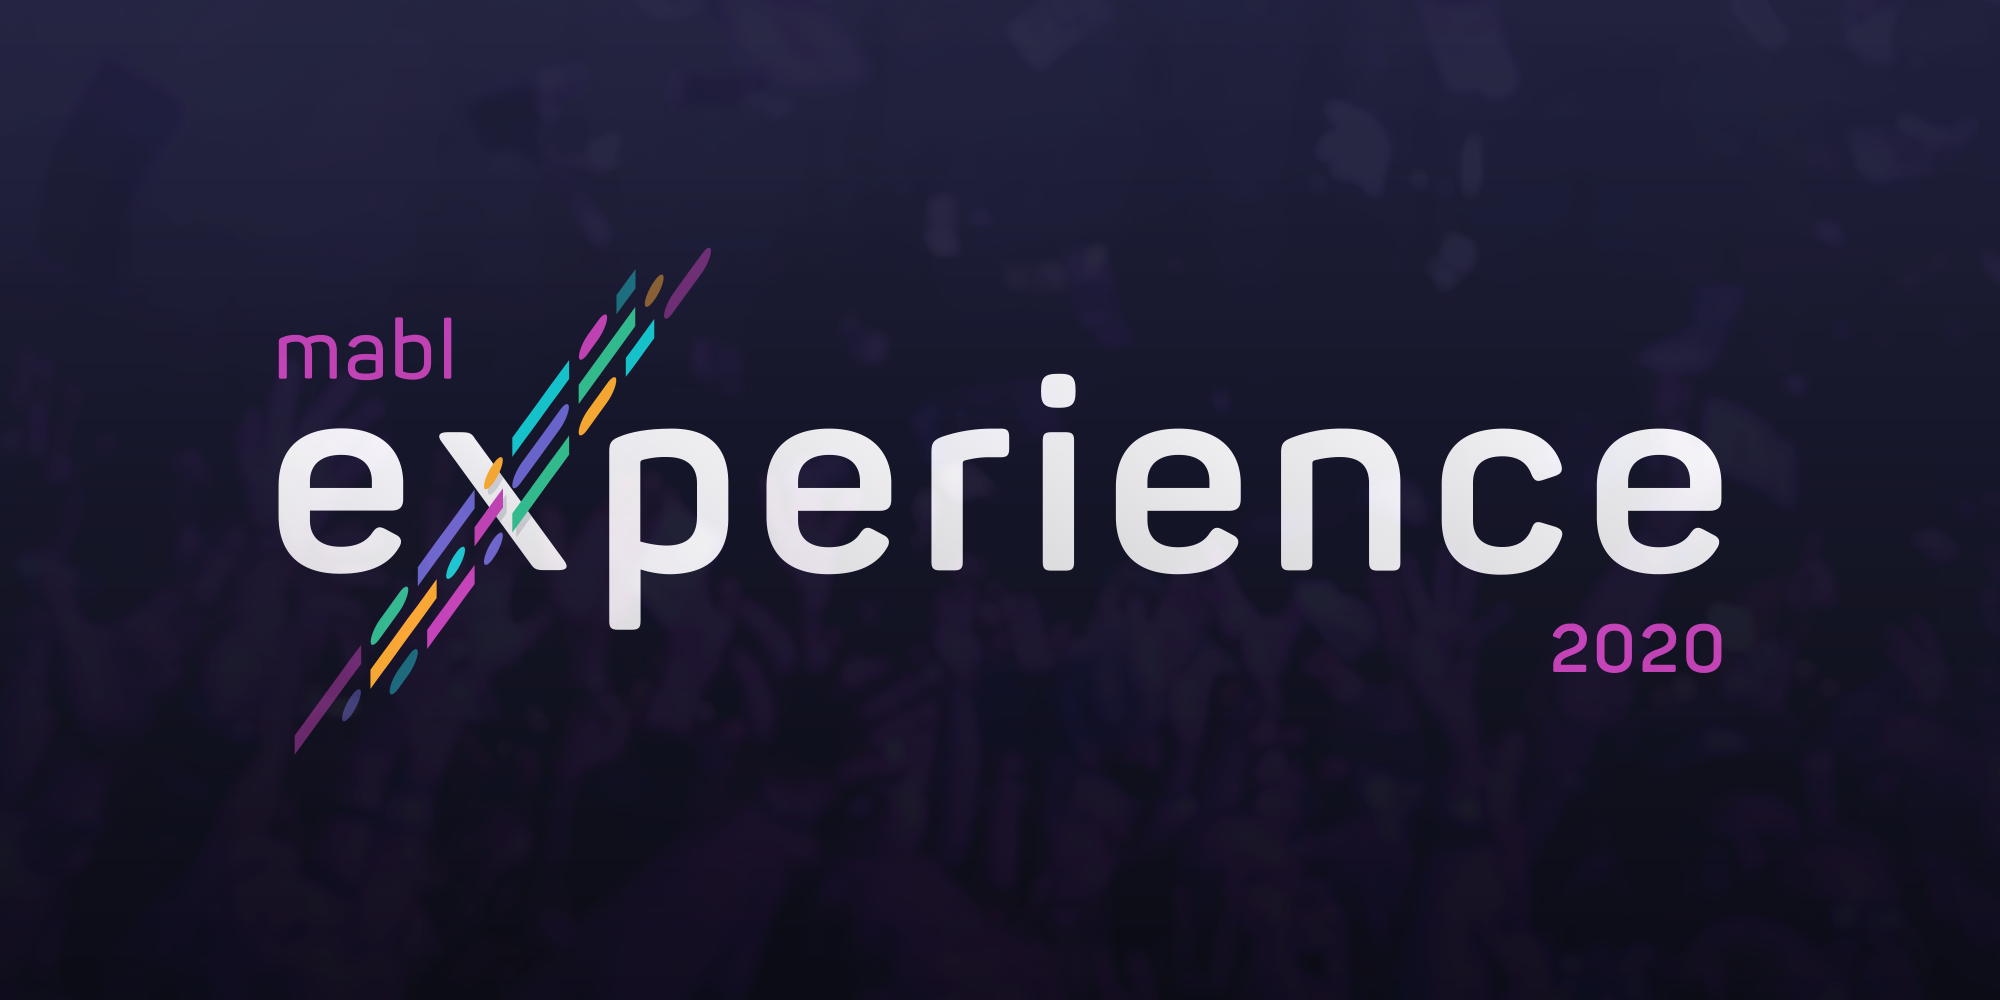 Announcing mabl experience 2020